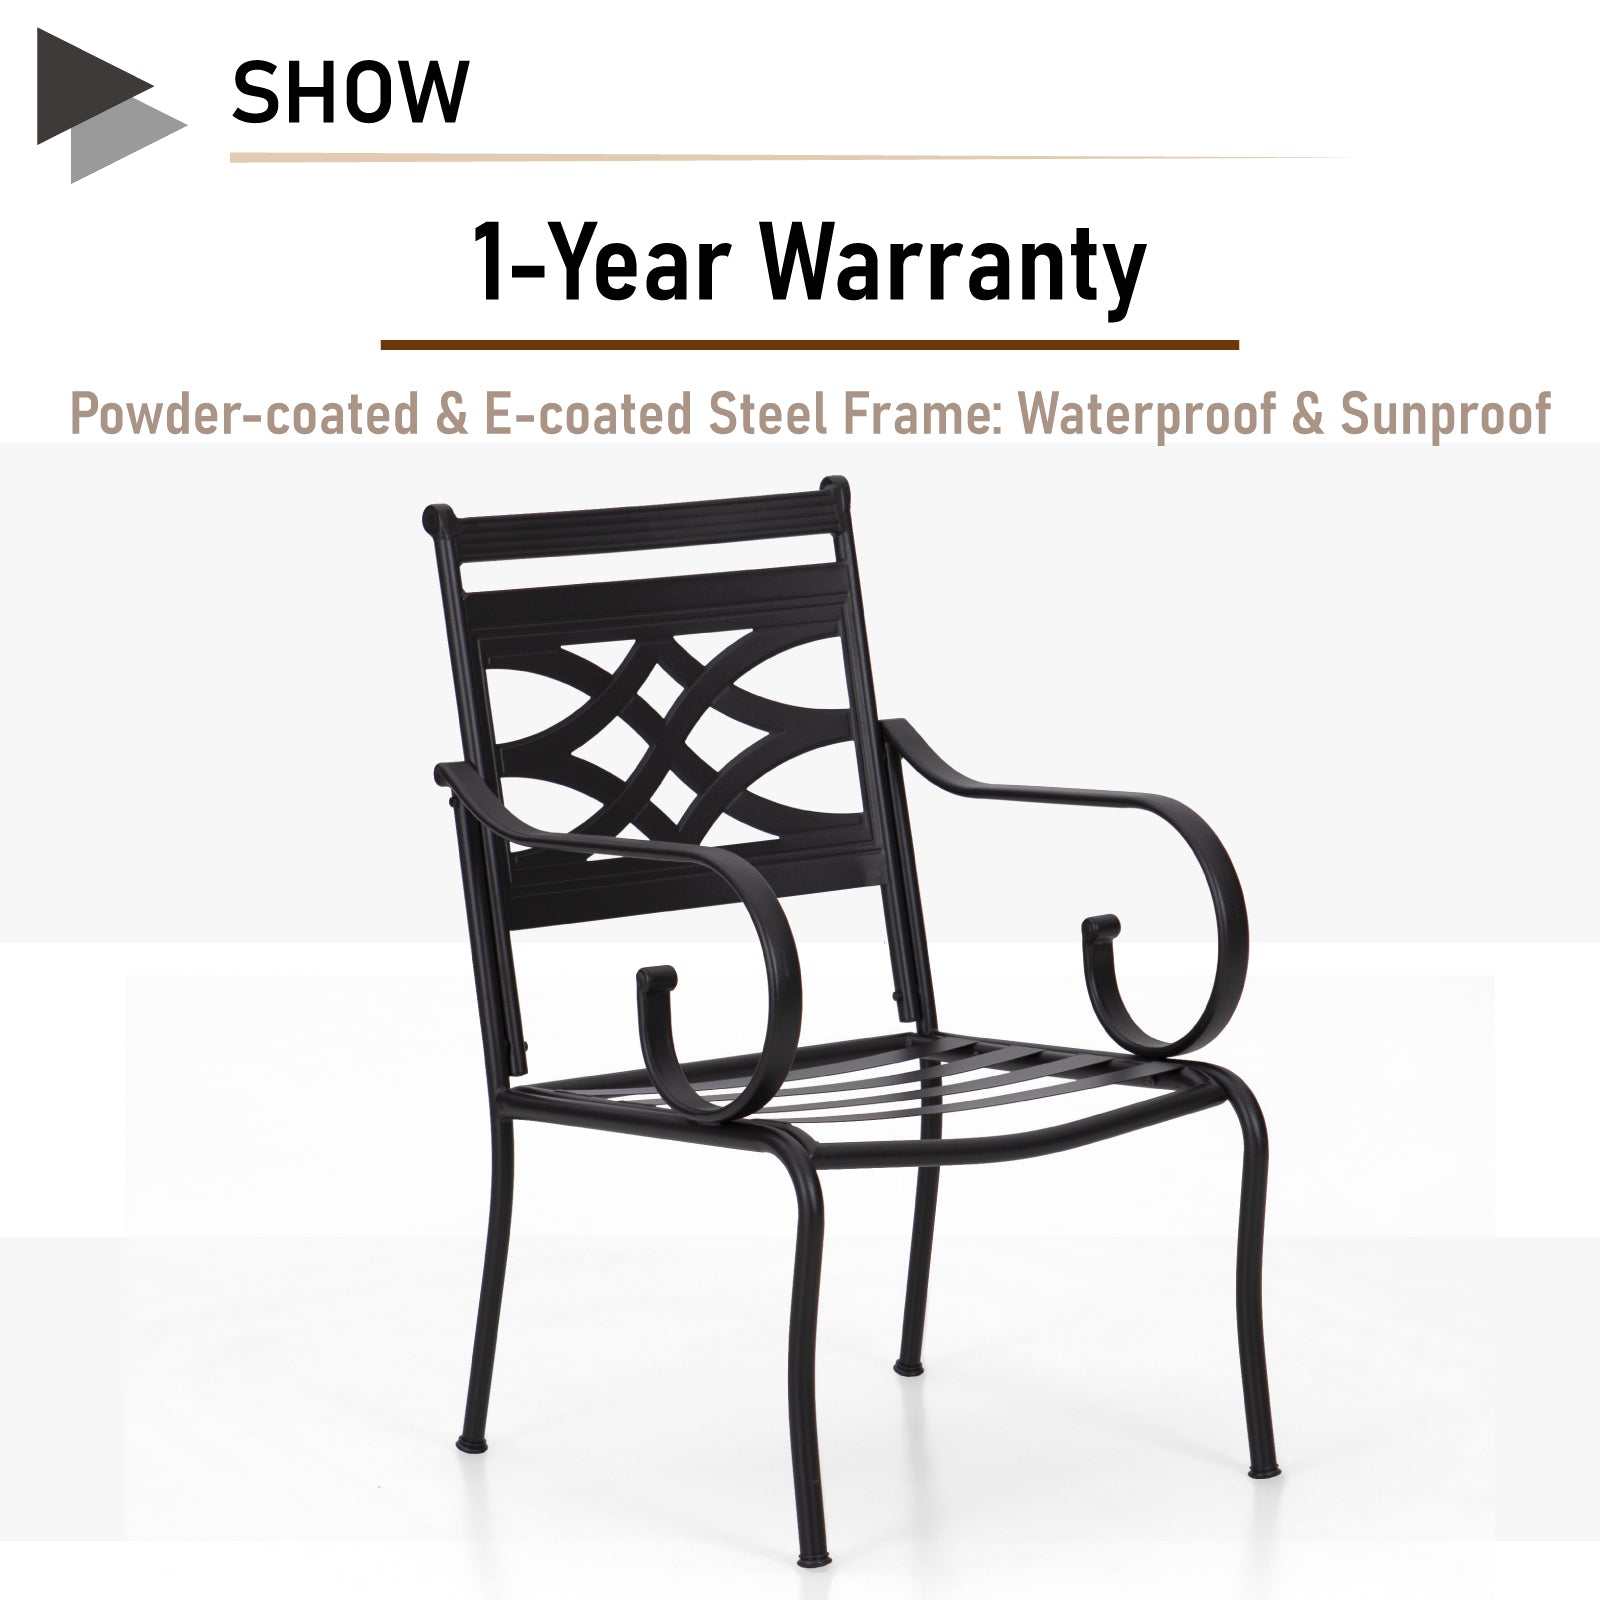 MFSTUDIO 7-Piece Outdoor Dining Set Steel Rectangle Table & Elegant Cast Iron Pattern Dining Chairs